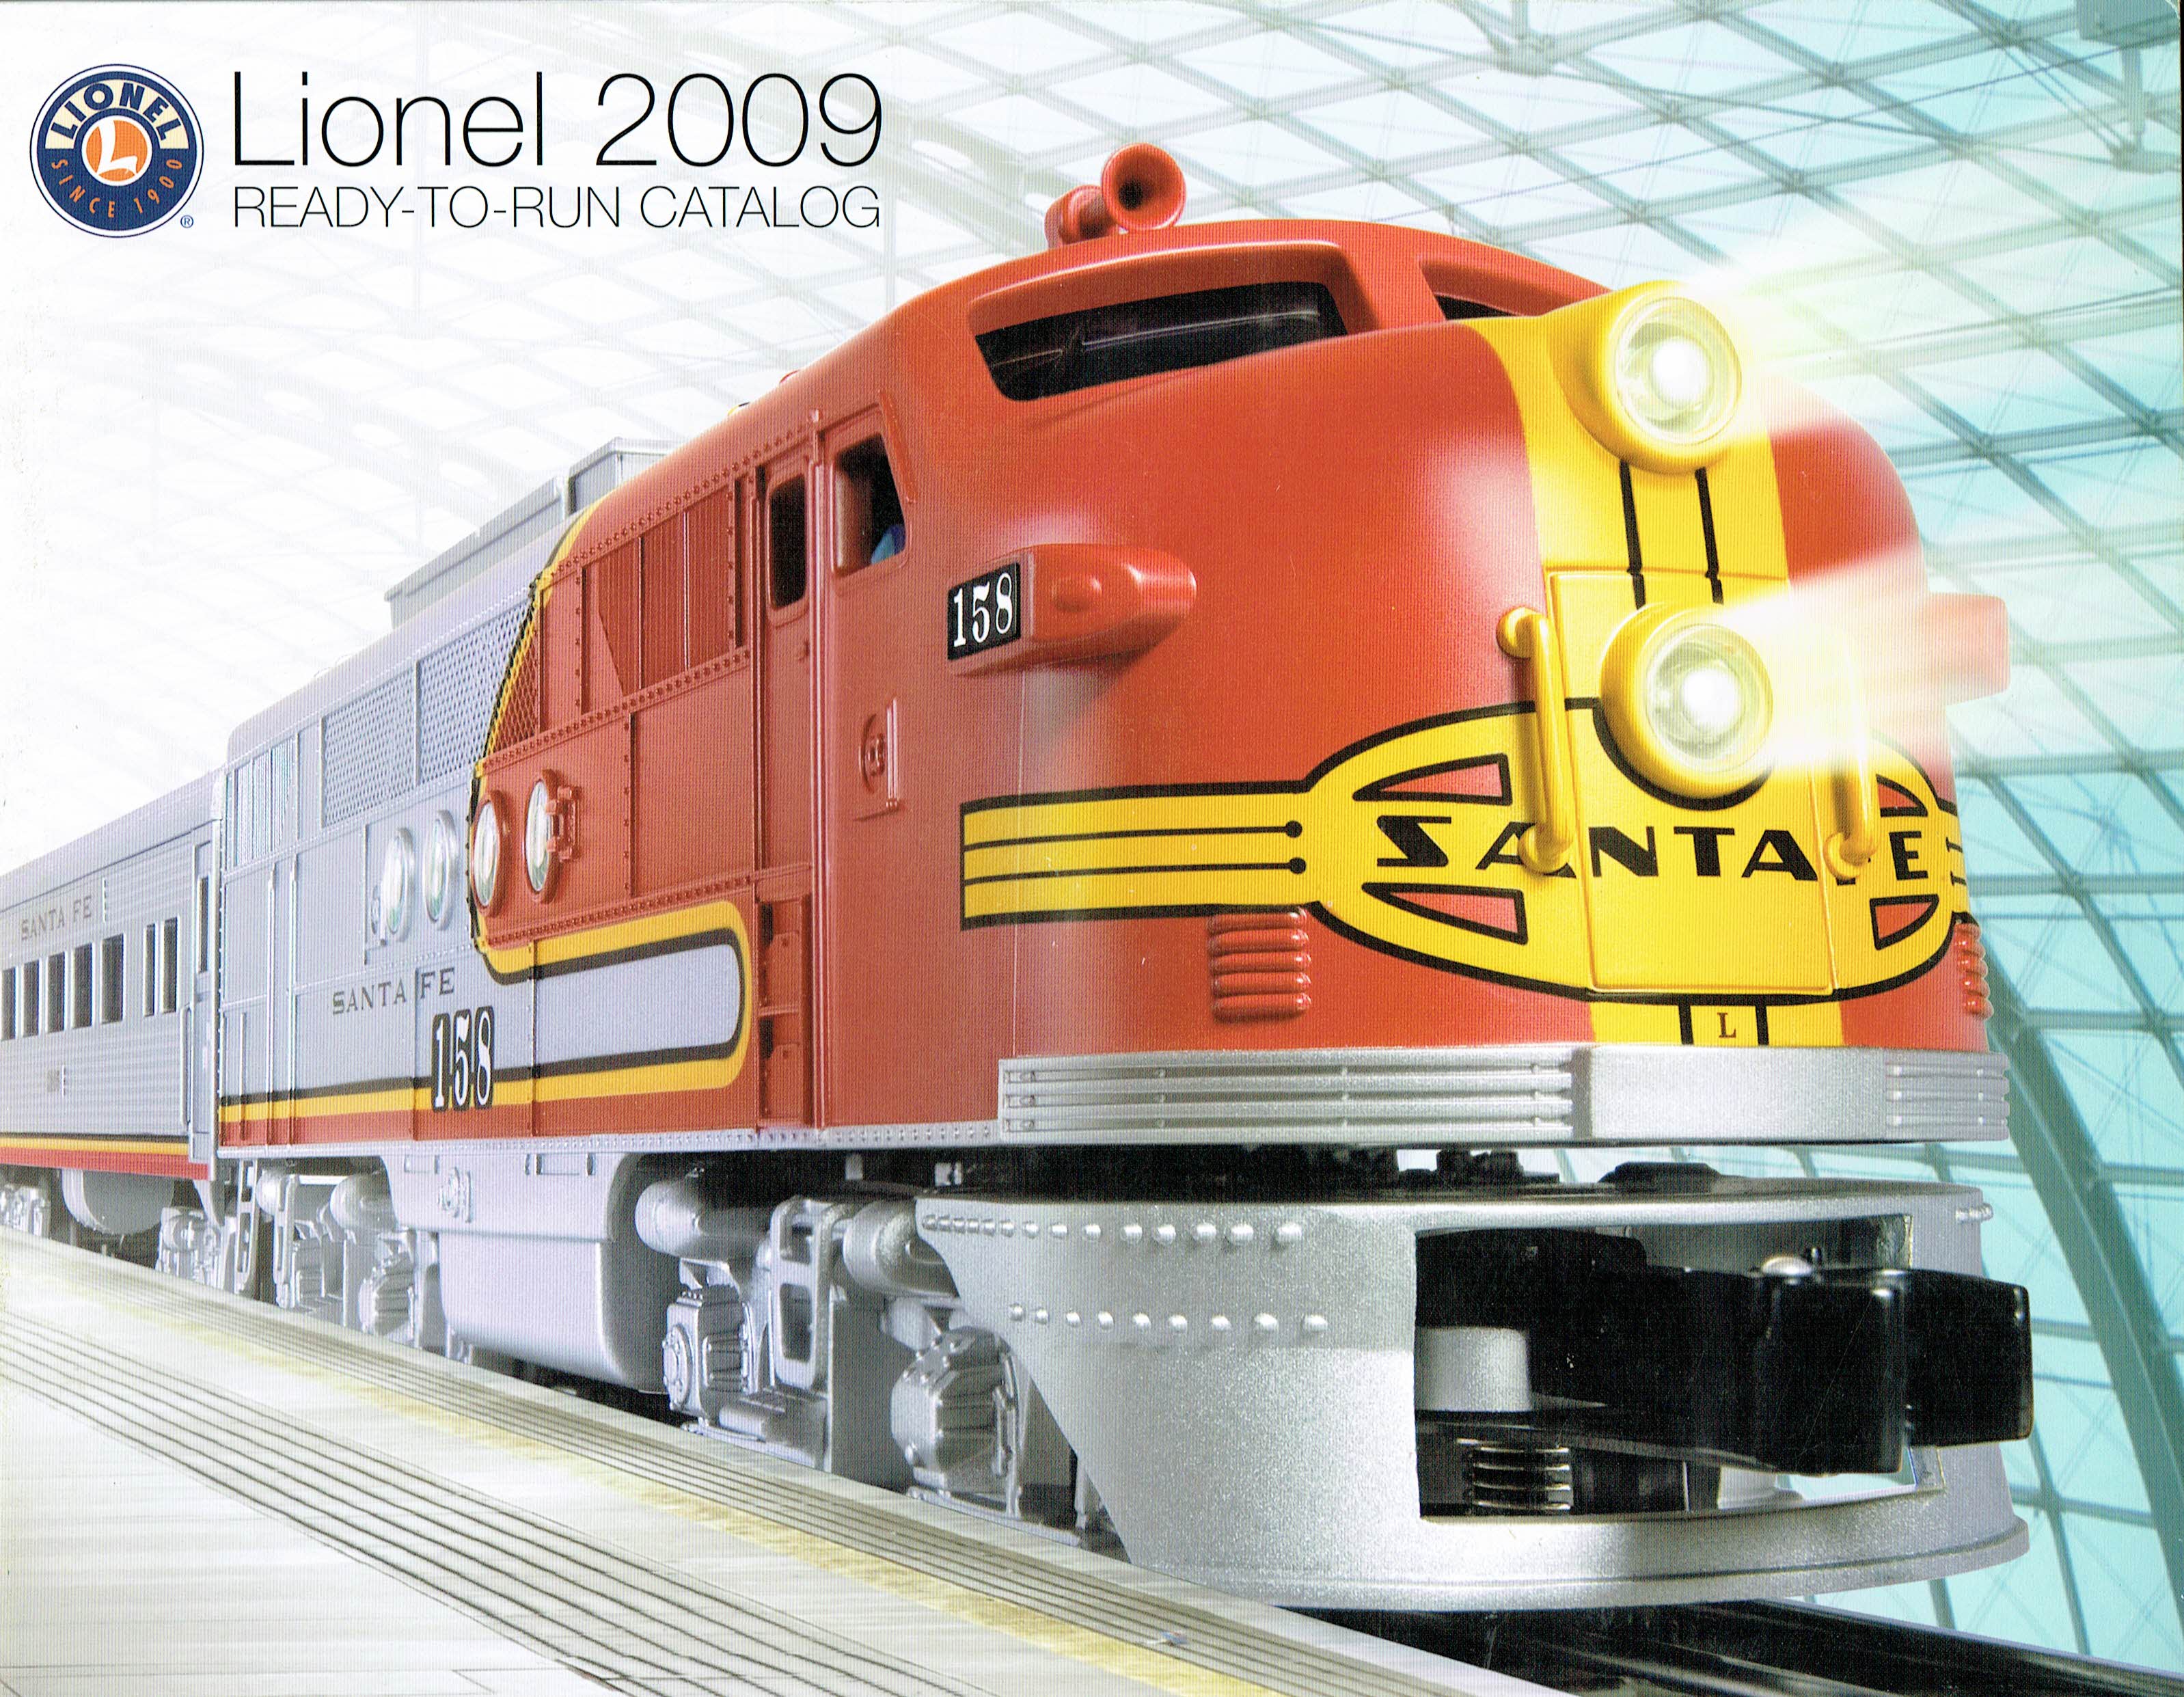 Lionel 2009 Ready-to-Run Catalog image